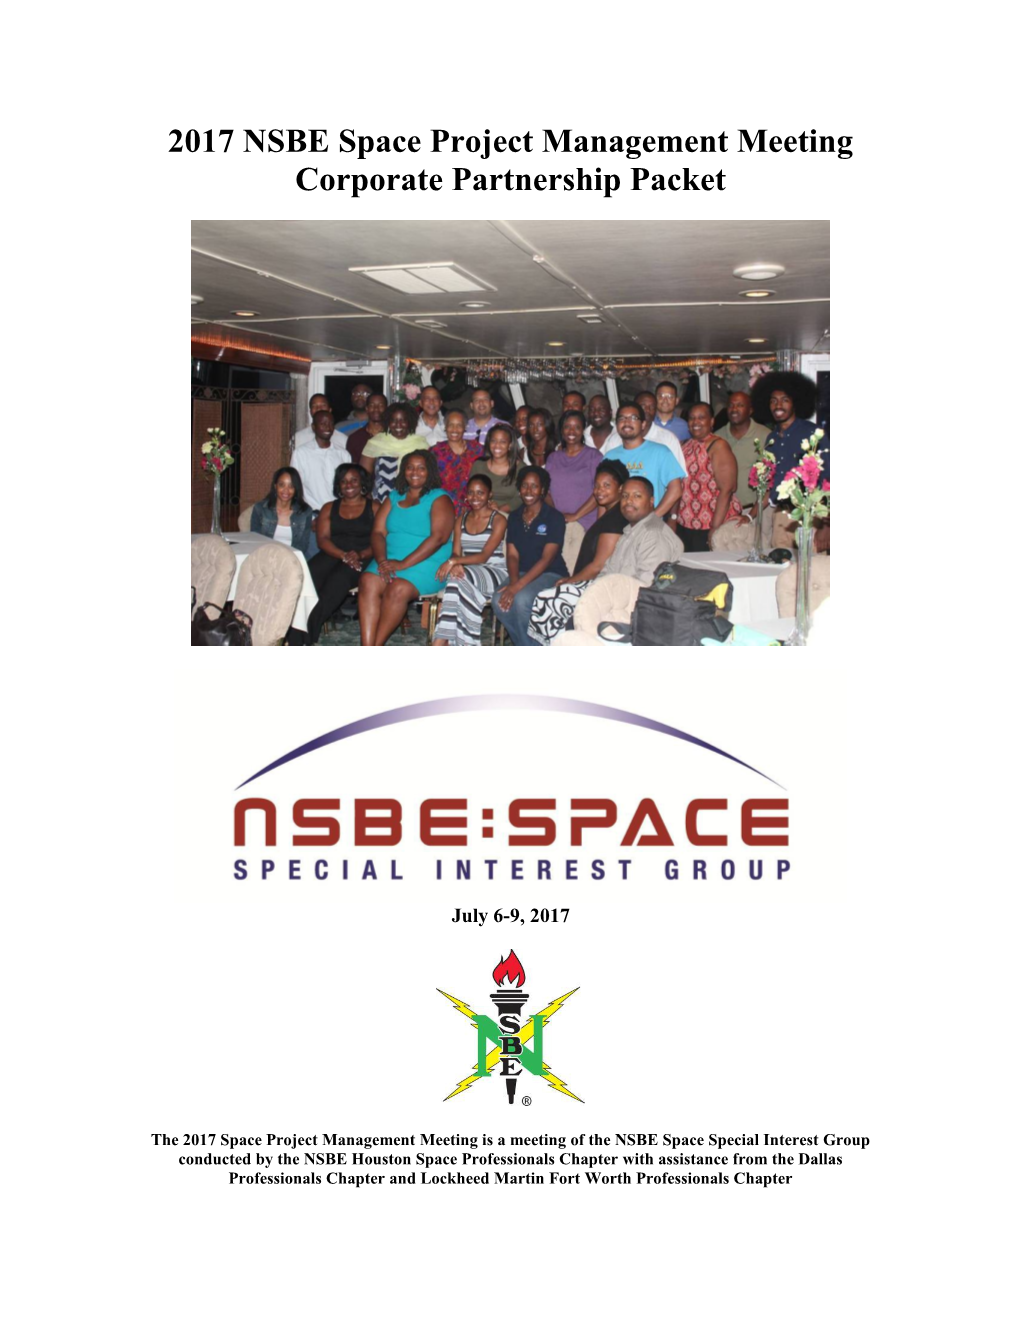 2015 NSBE Space Leadership Conference